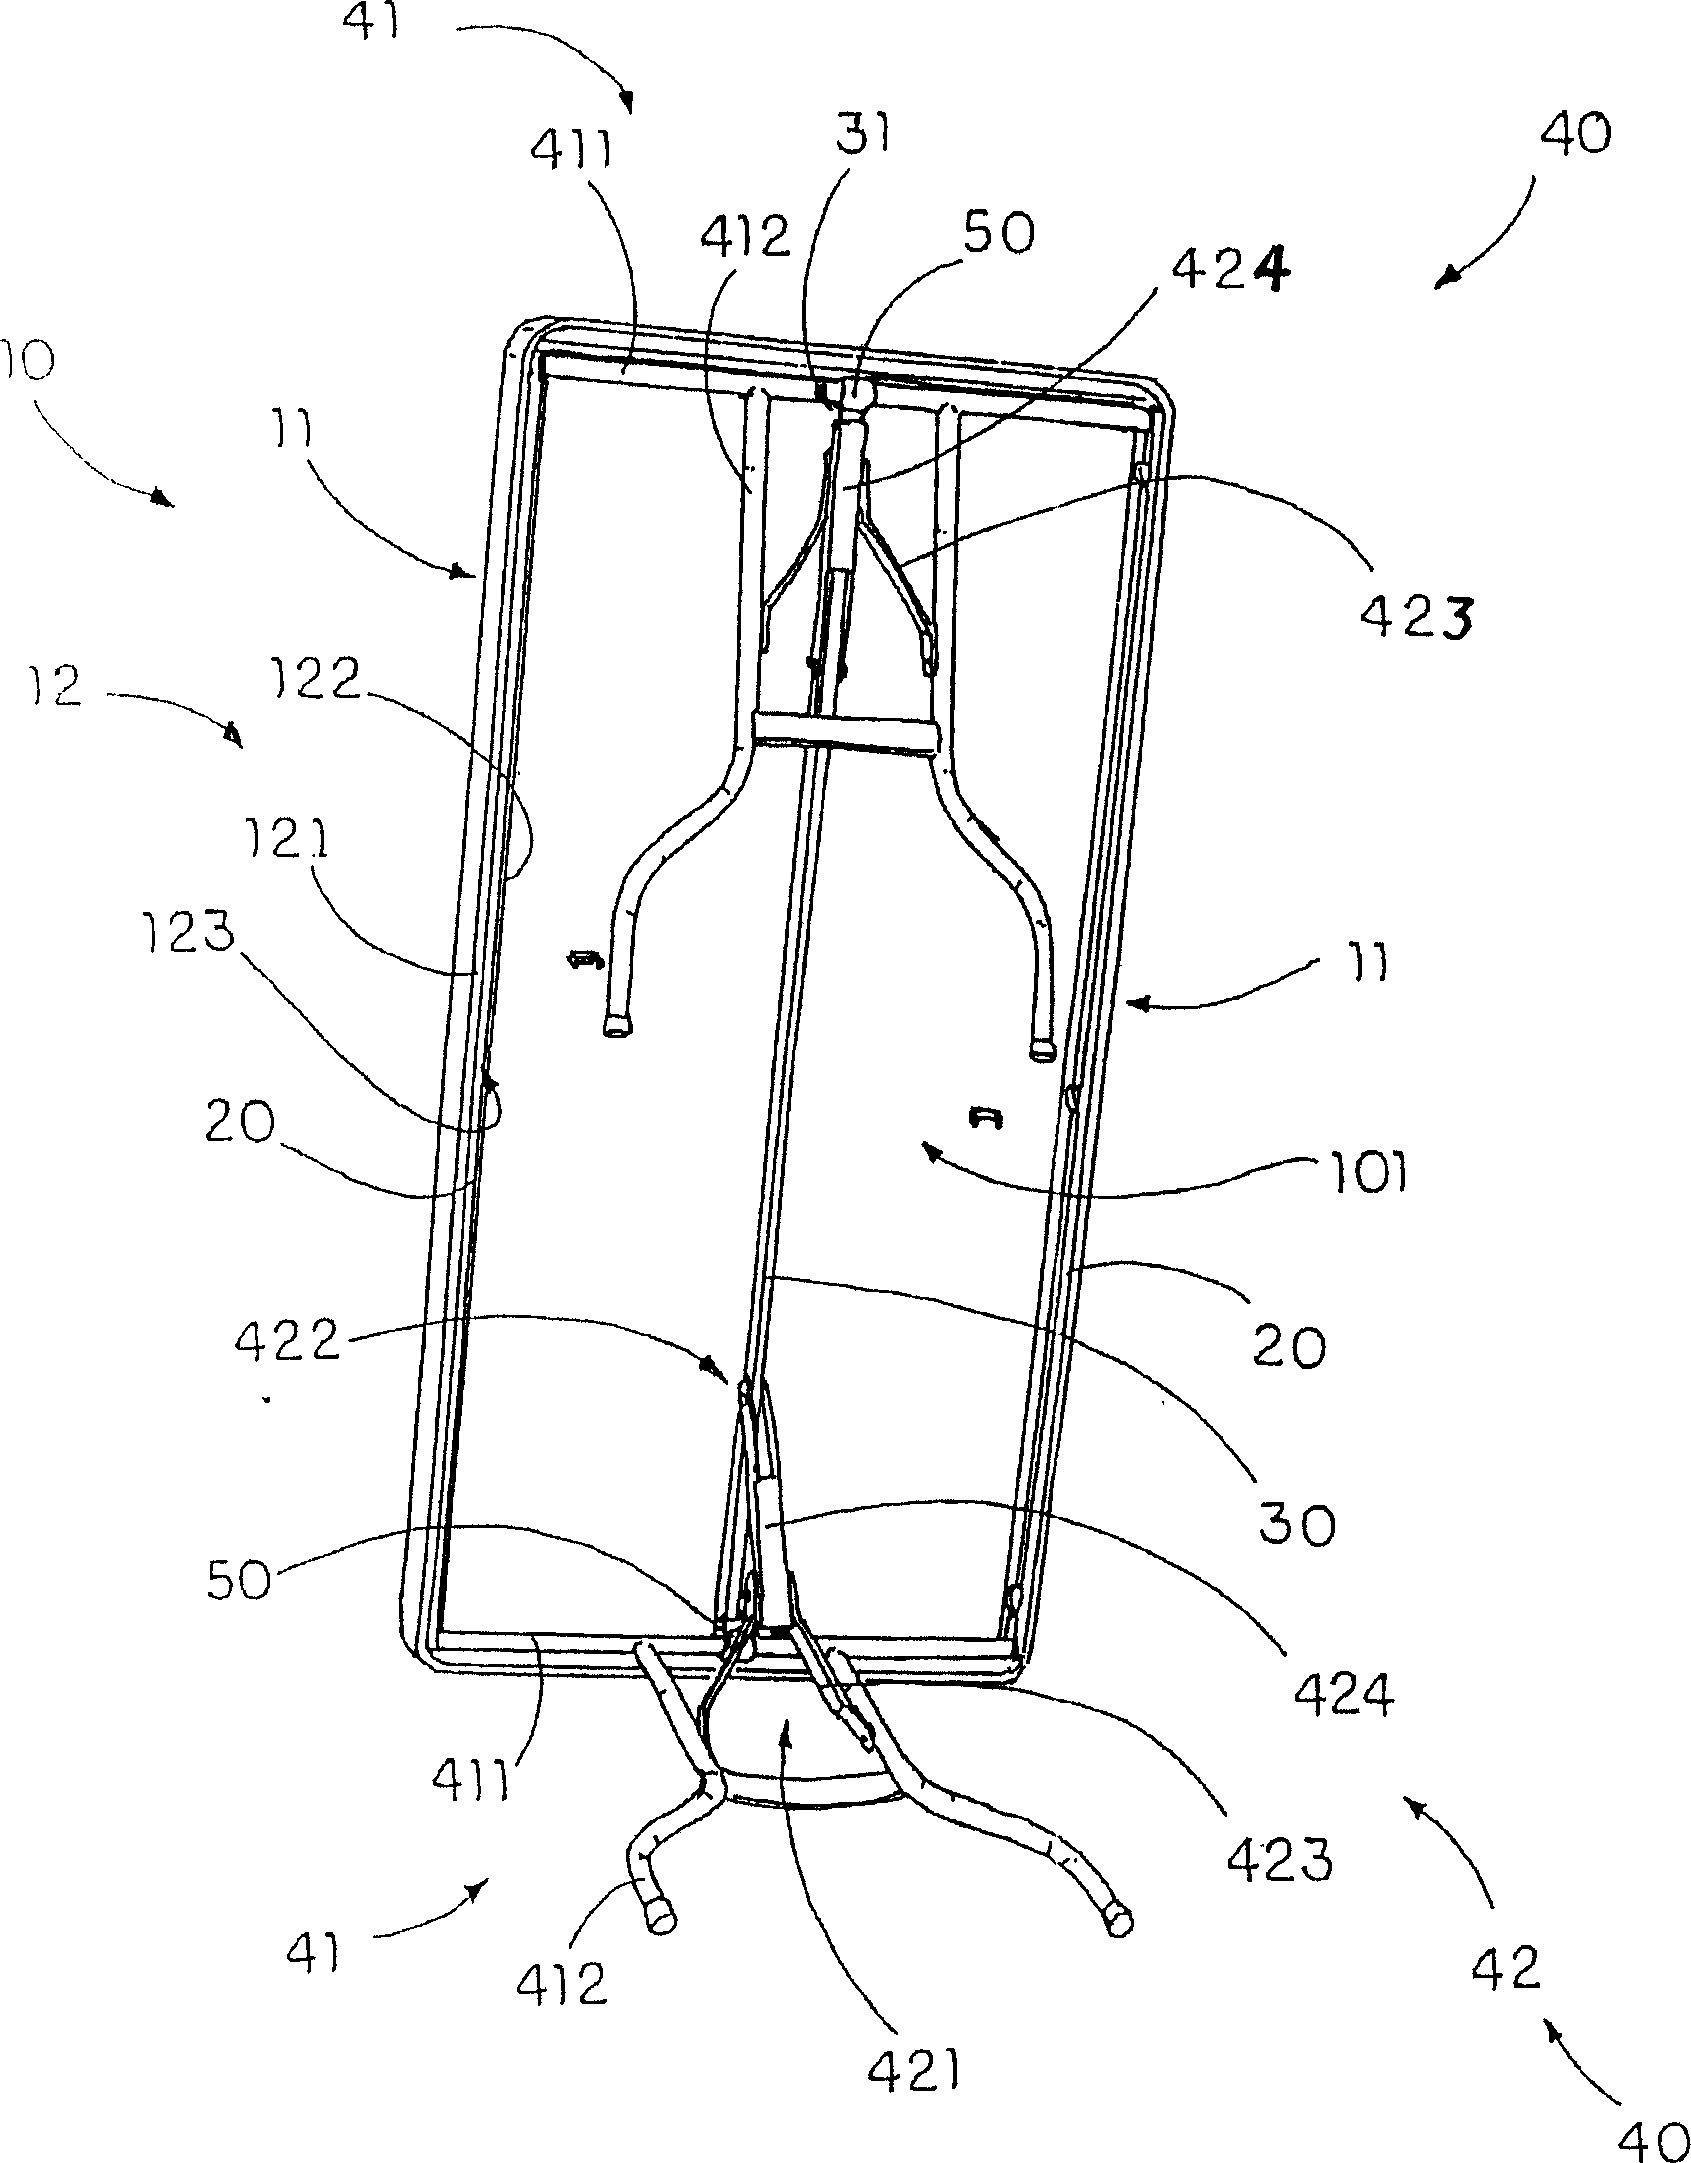 Foldable table with longitudinal mid-support arrangement